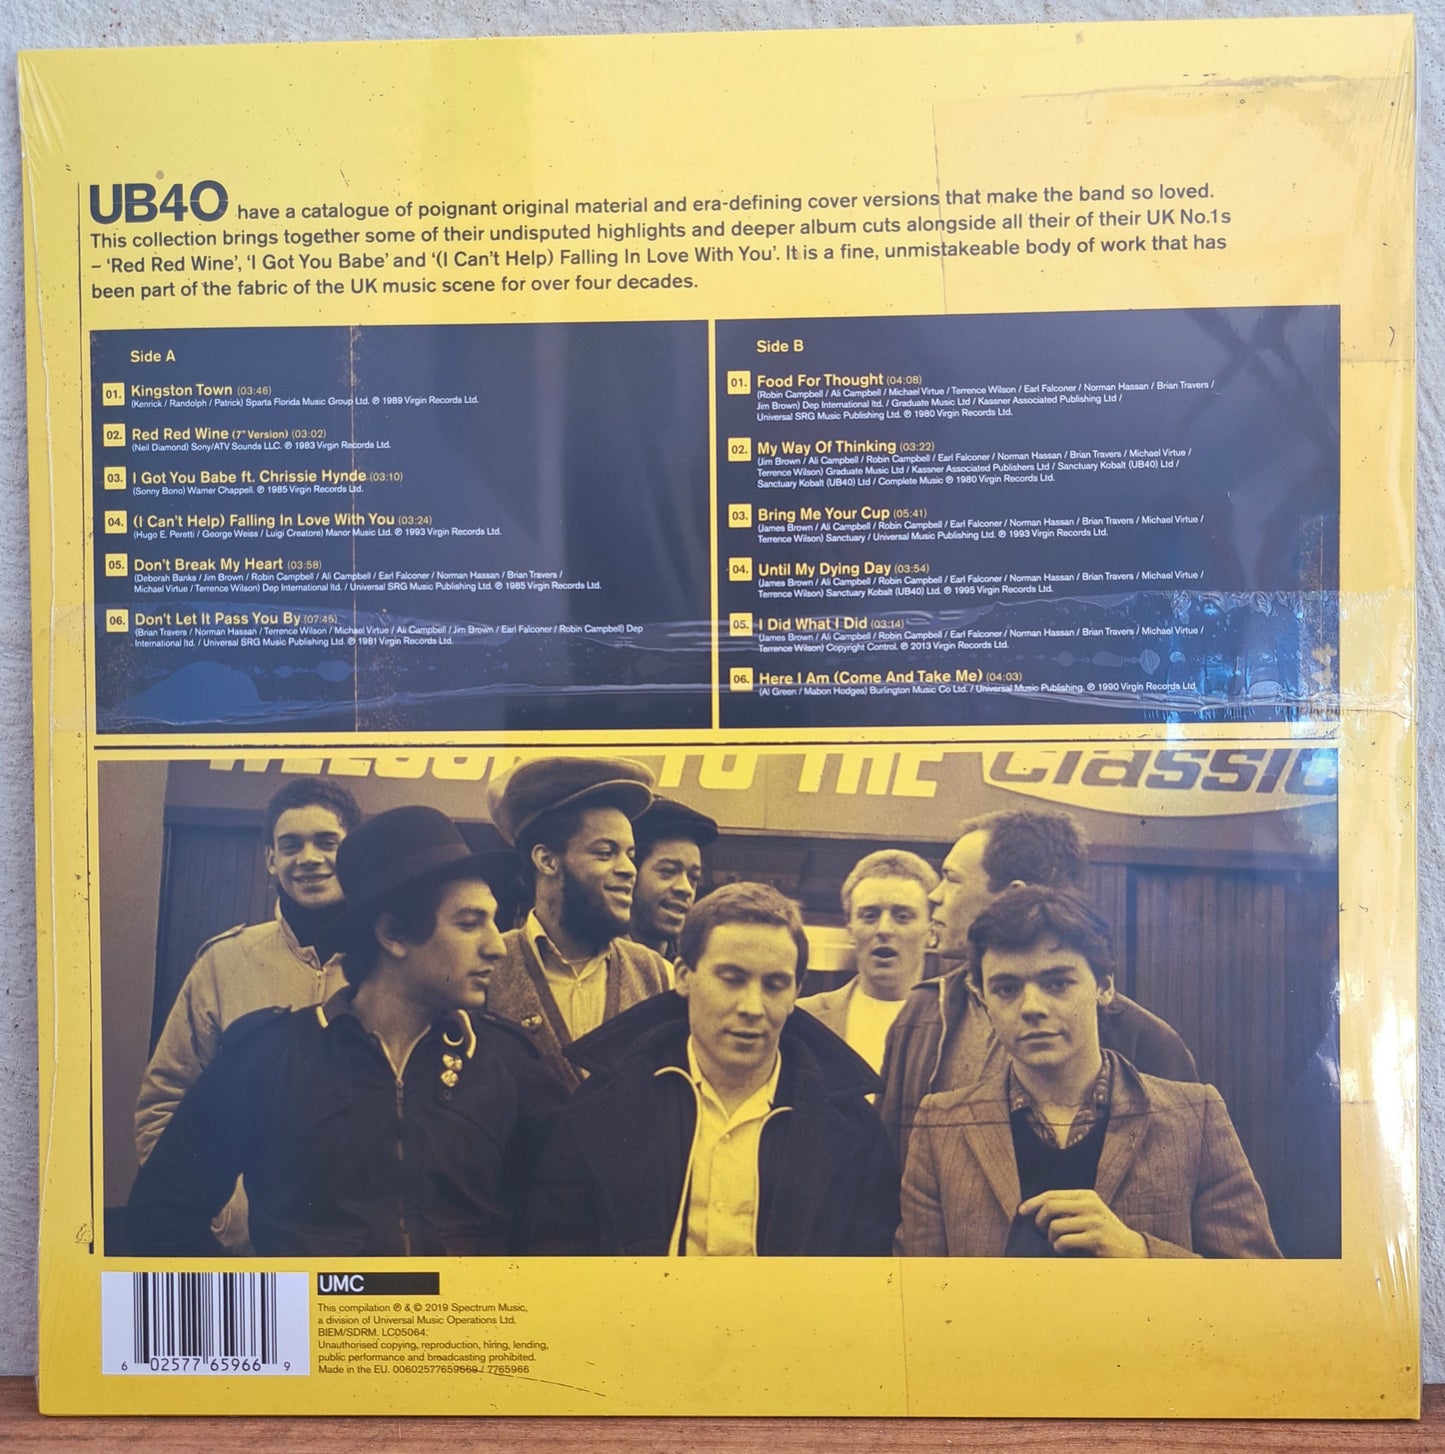 UB40,- Red Red Wine/The Collection (new/sealed)